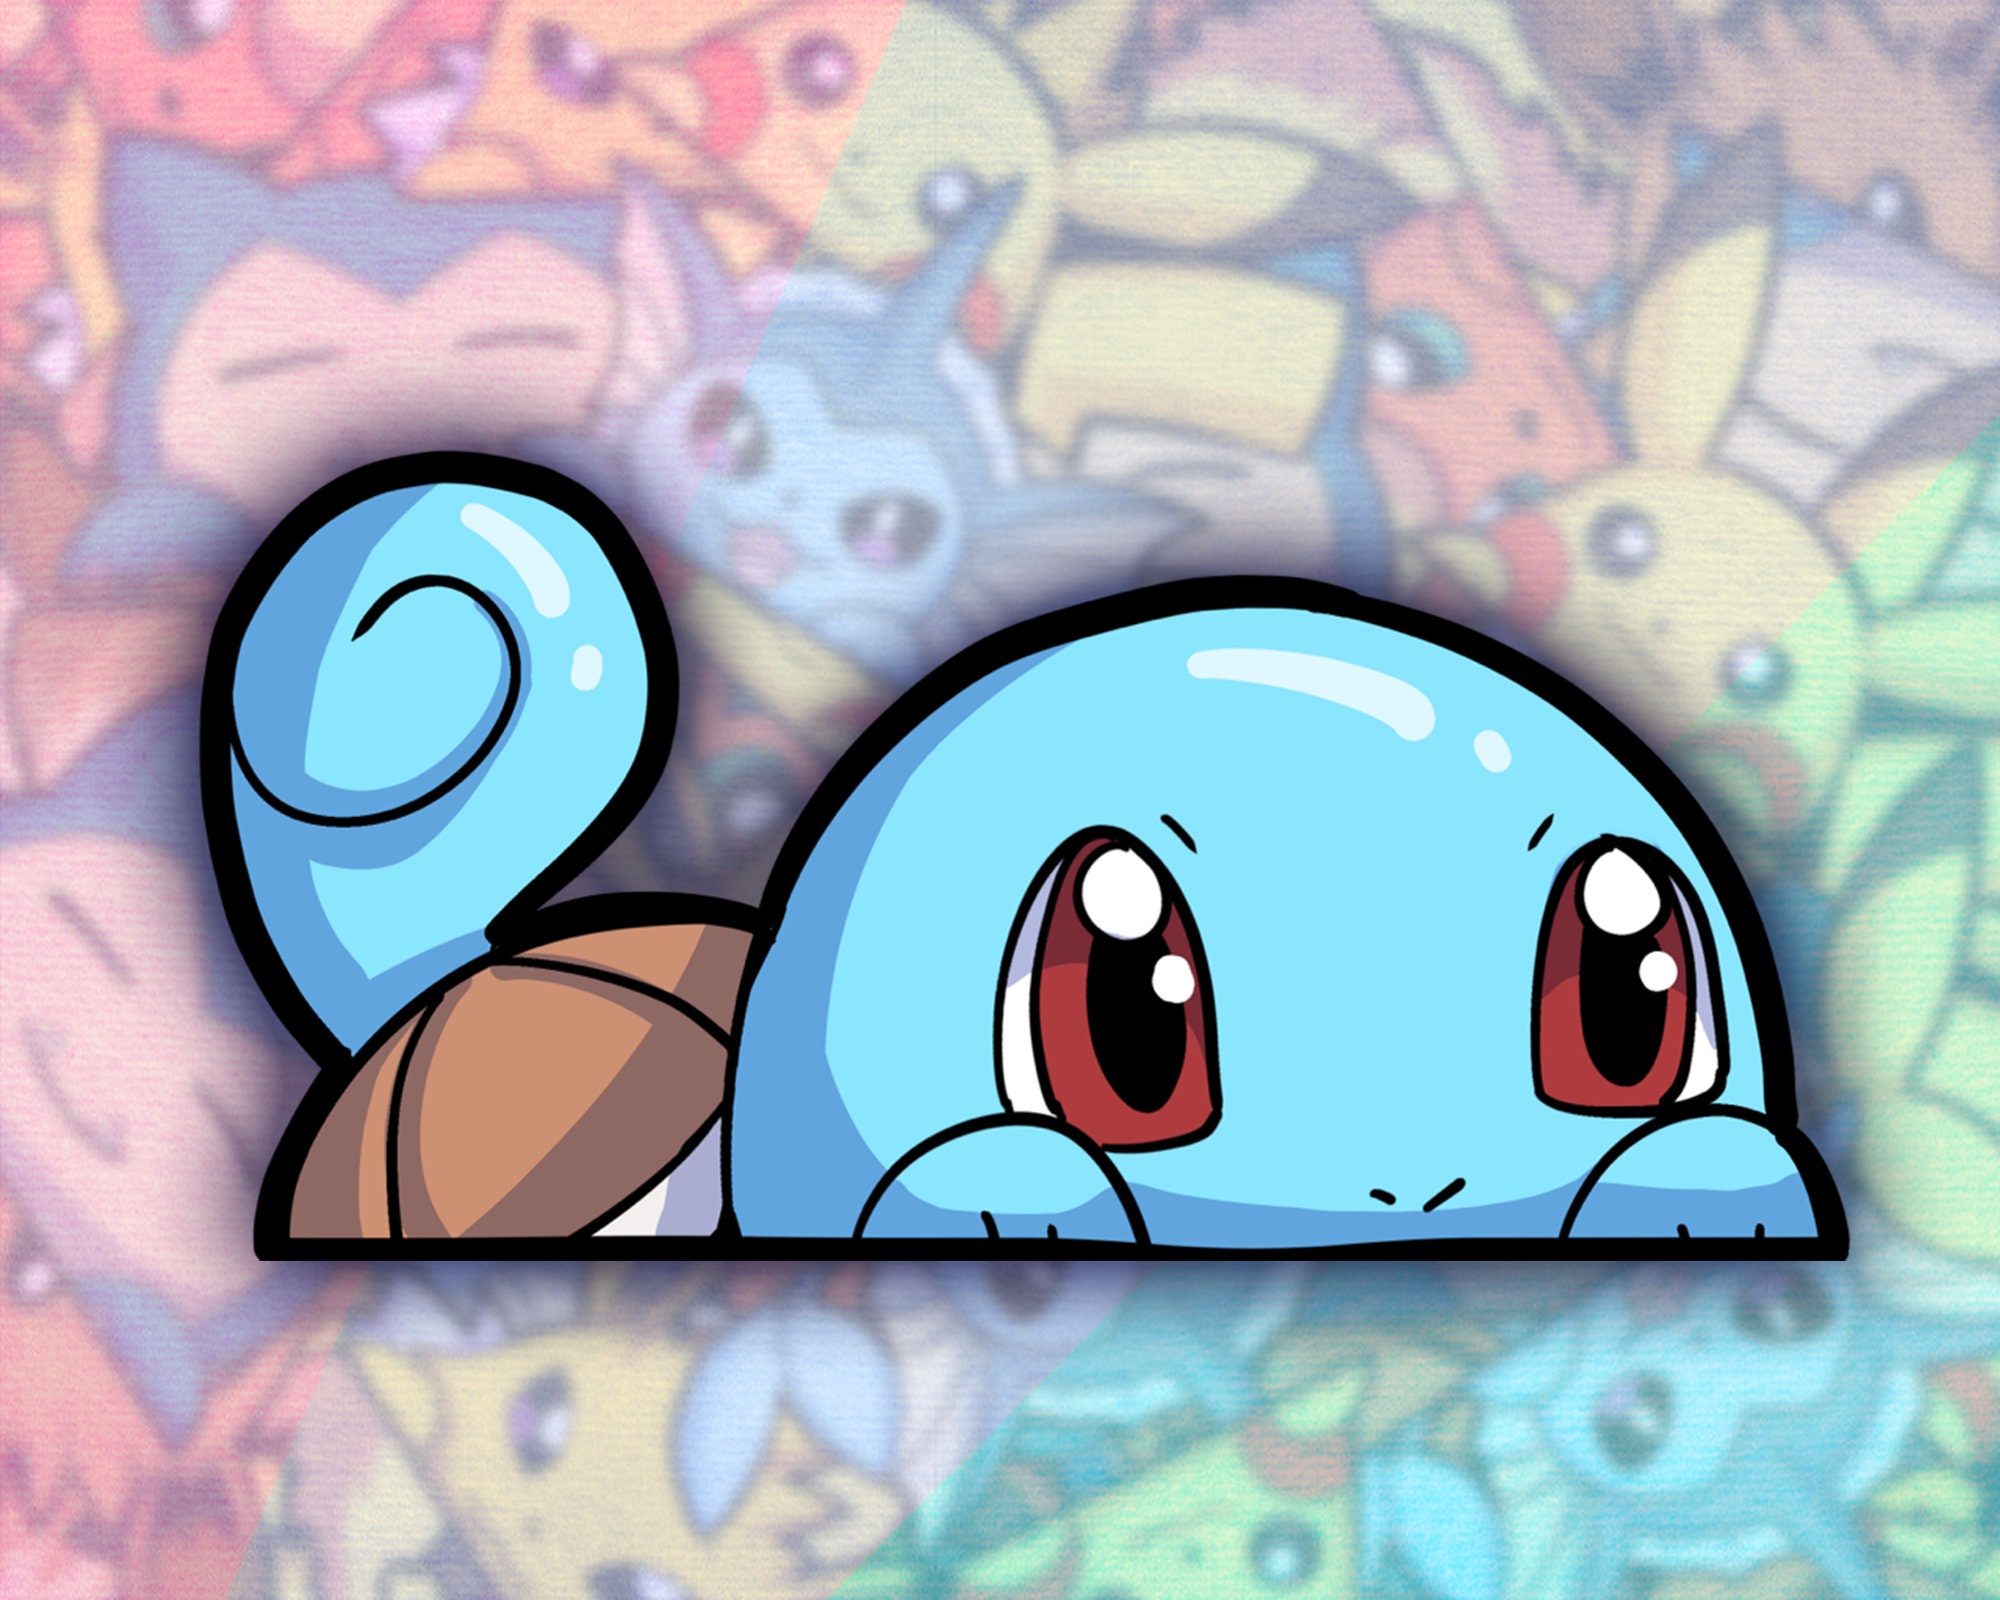 Squirtle Pokemon Glasses Peeker sticker/Decal x2 - 6 in high